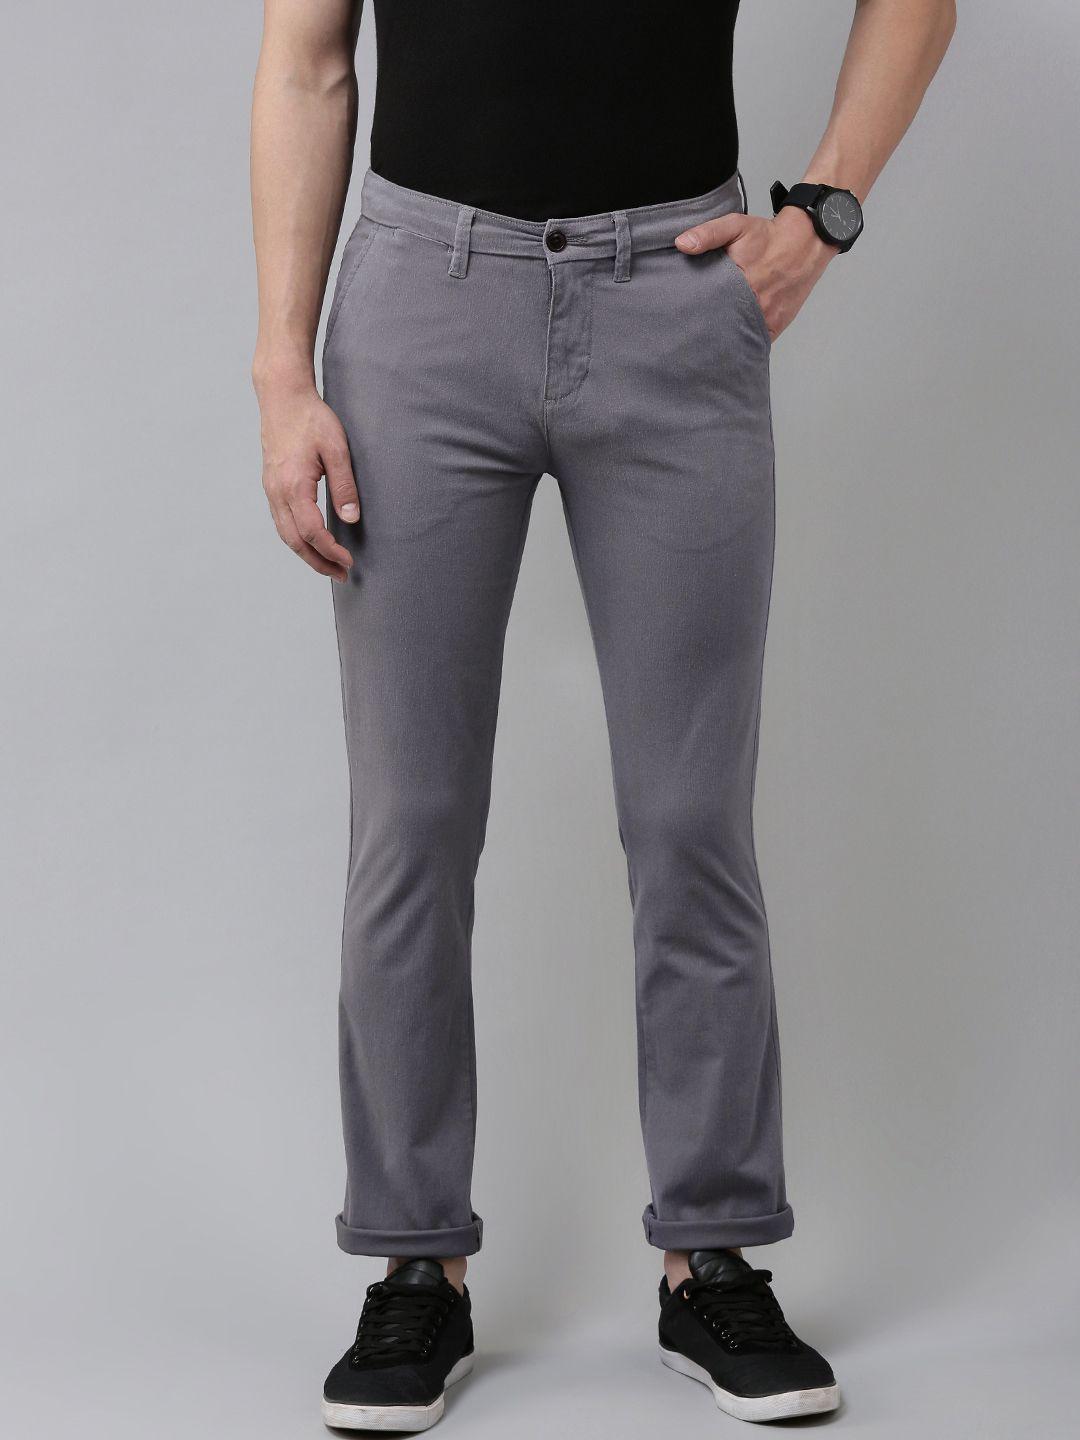 pepe jeans men grey solid slim fit chinos trousers